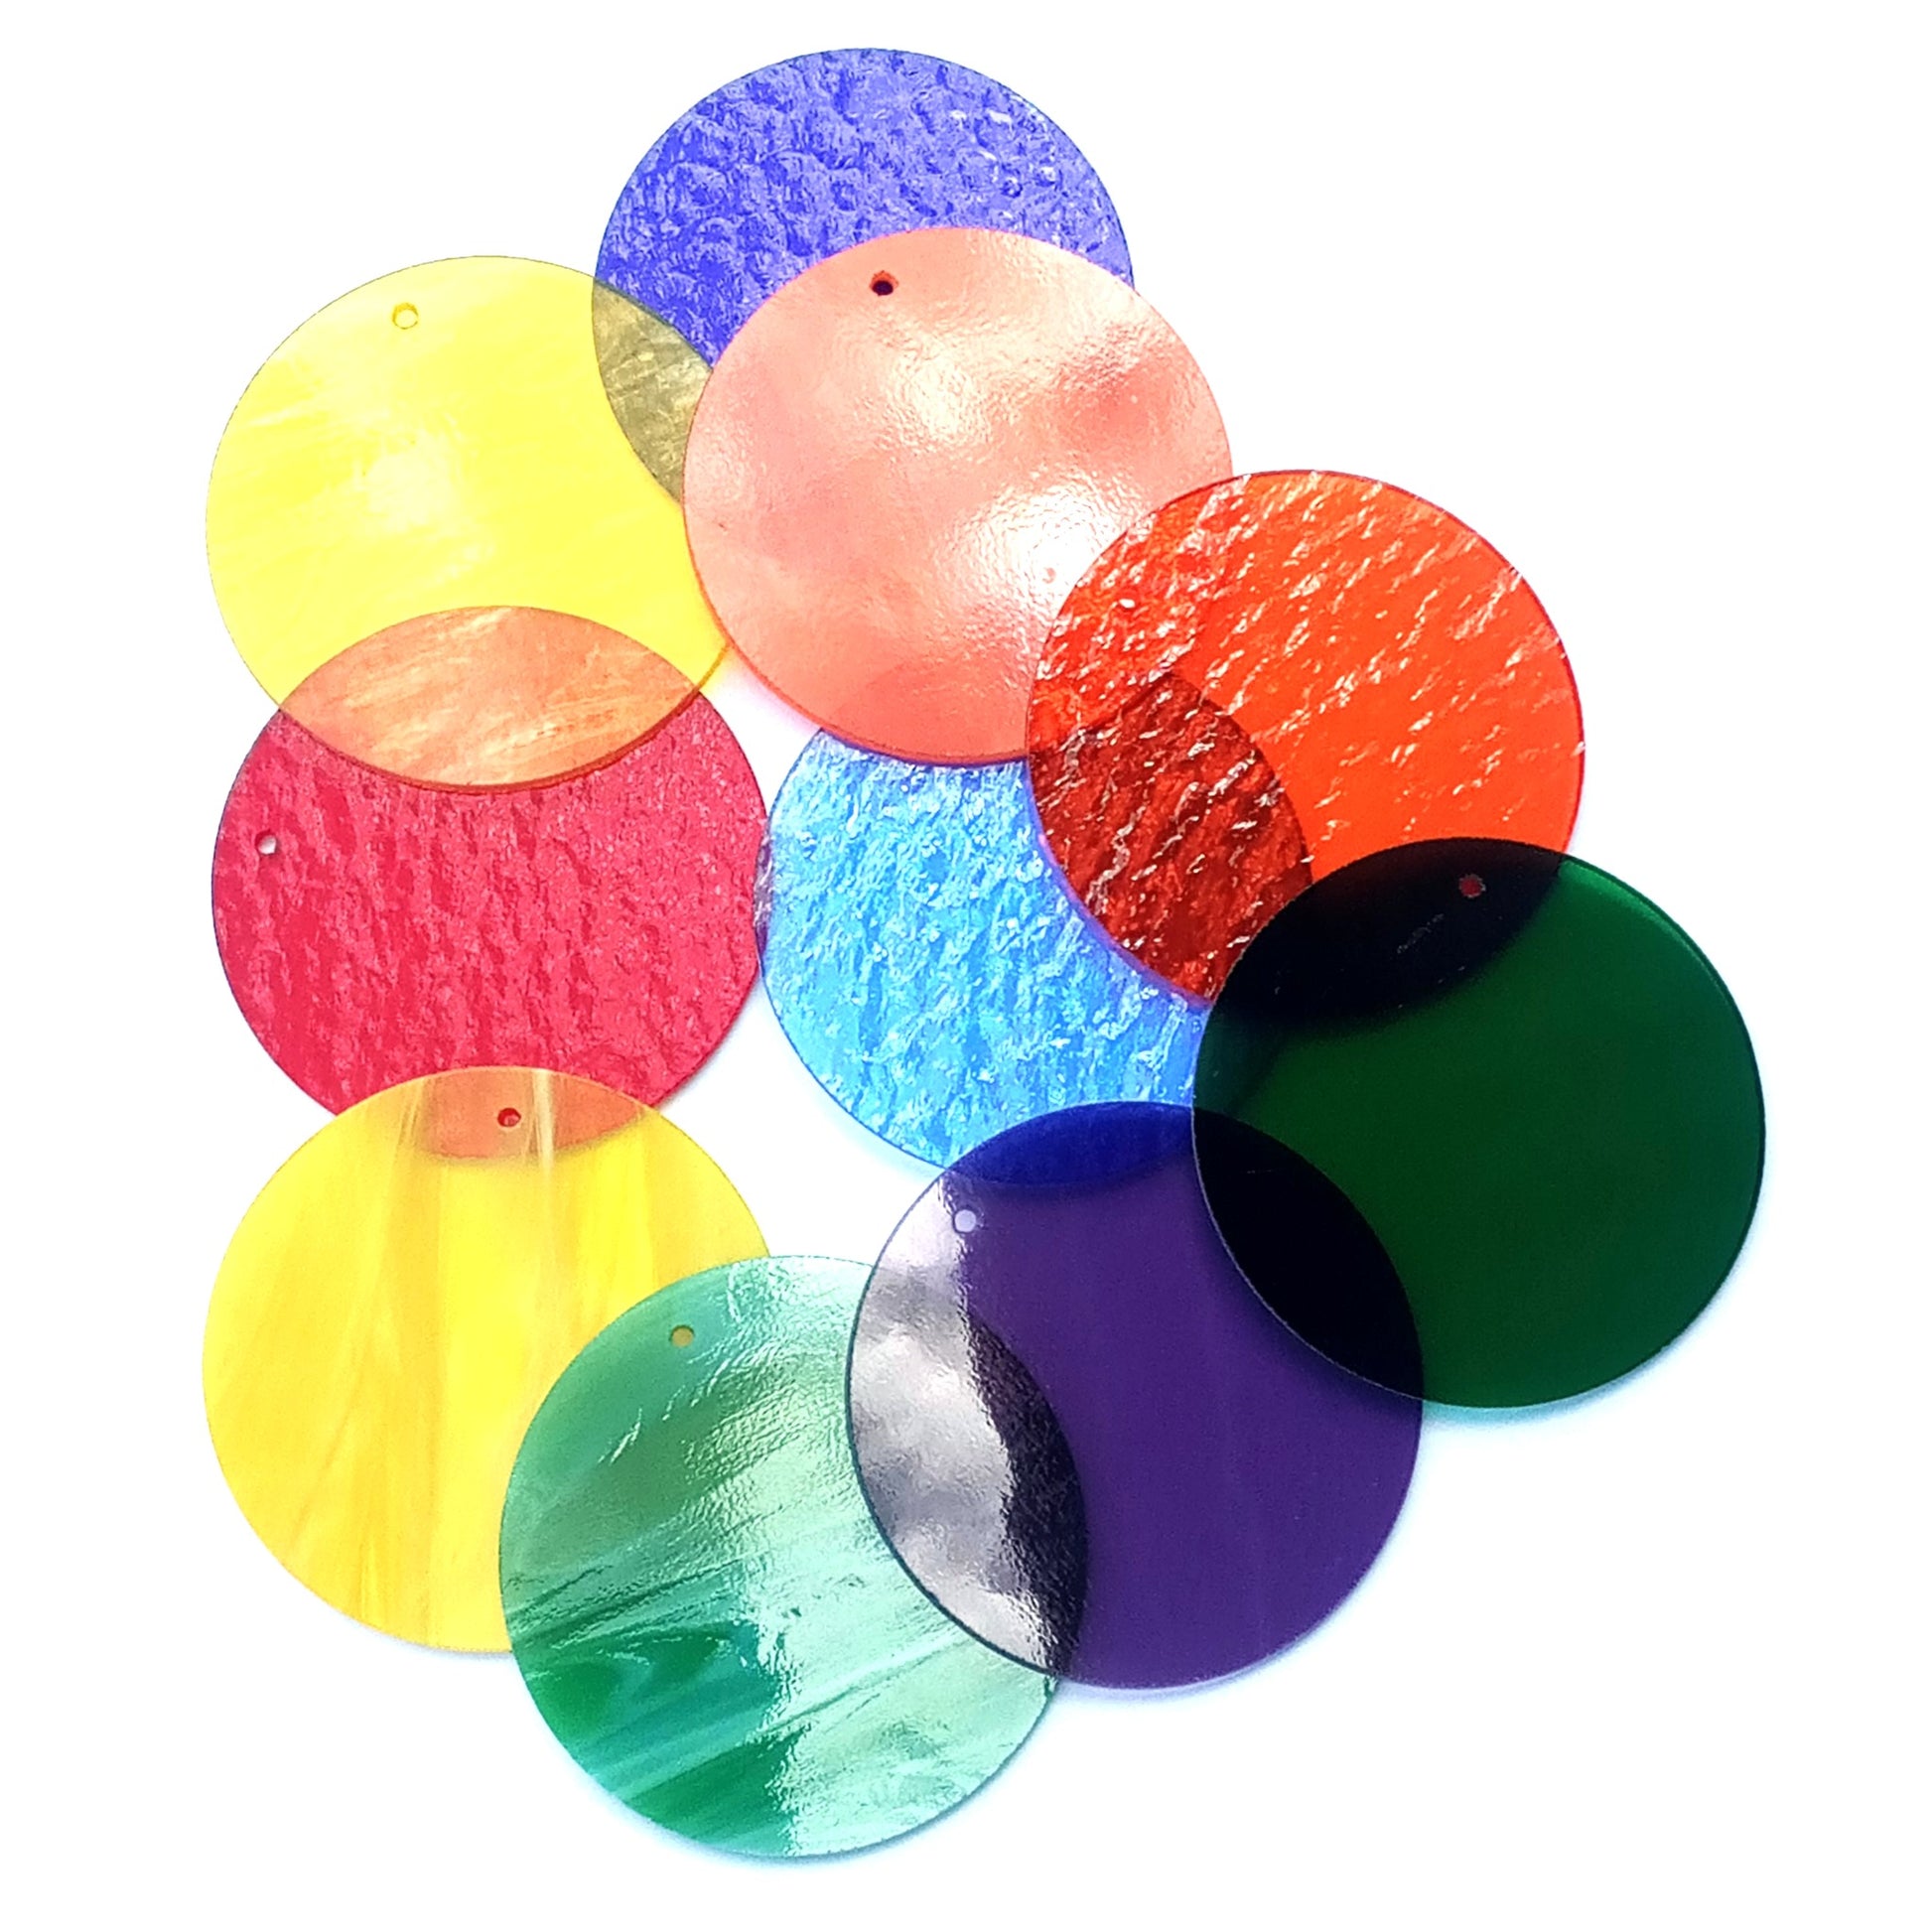 Precut Stained Glass Circles with Holes Drilled for Hanging, 3" Glass Circles for Ornaments, Windchimes, Glass Art, Suncatchers, Assorted Colors, All Translucent and Wispy Stained Glass